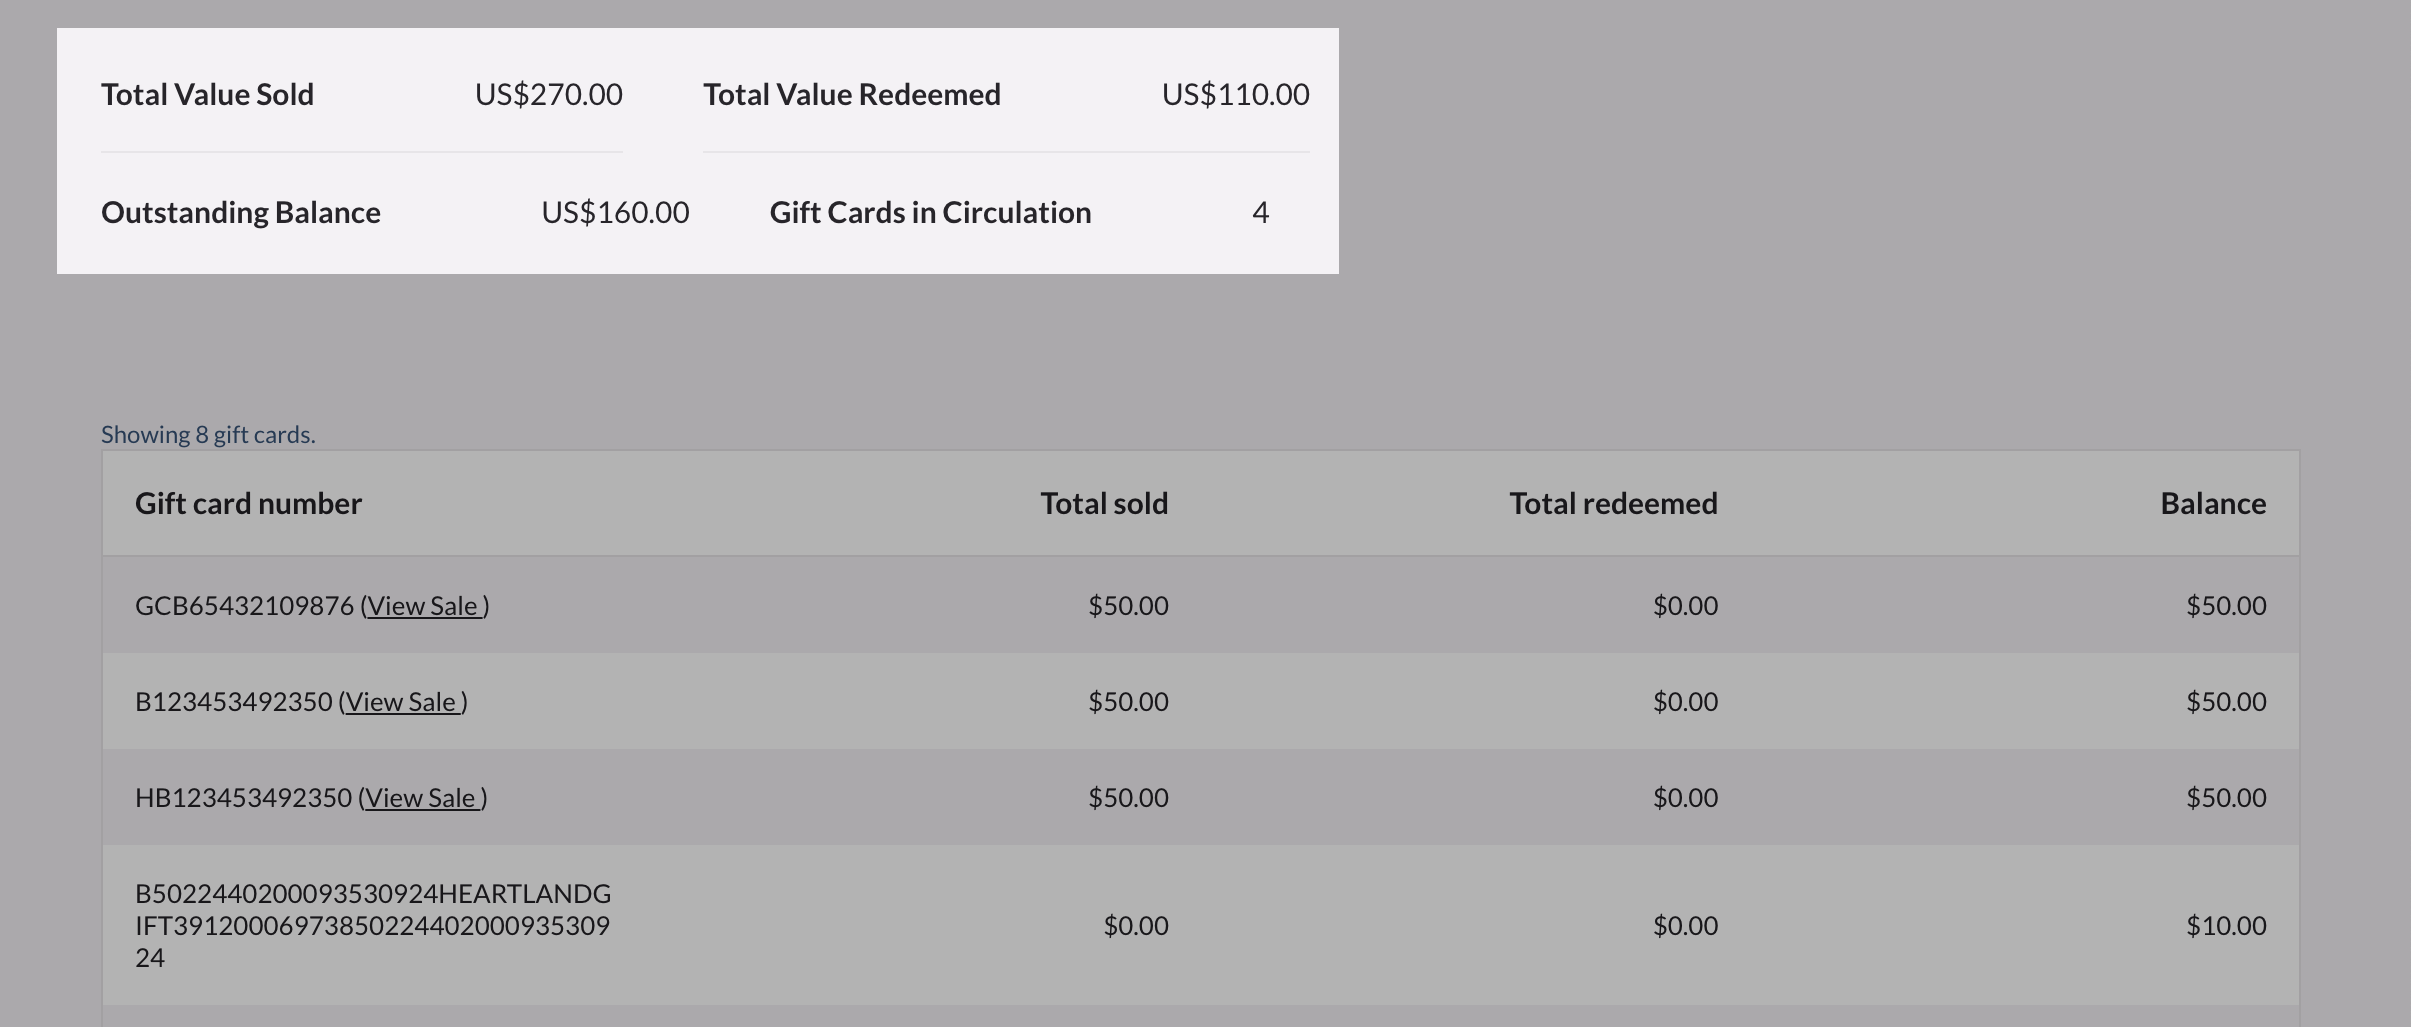 Gift-Card-Report-Totals.png